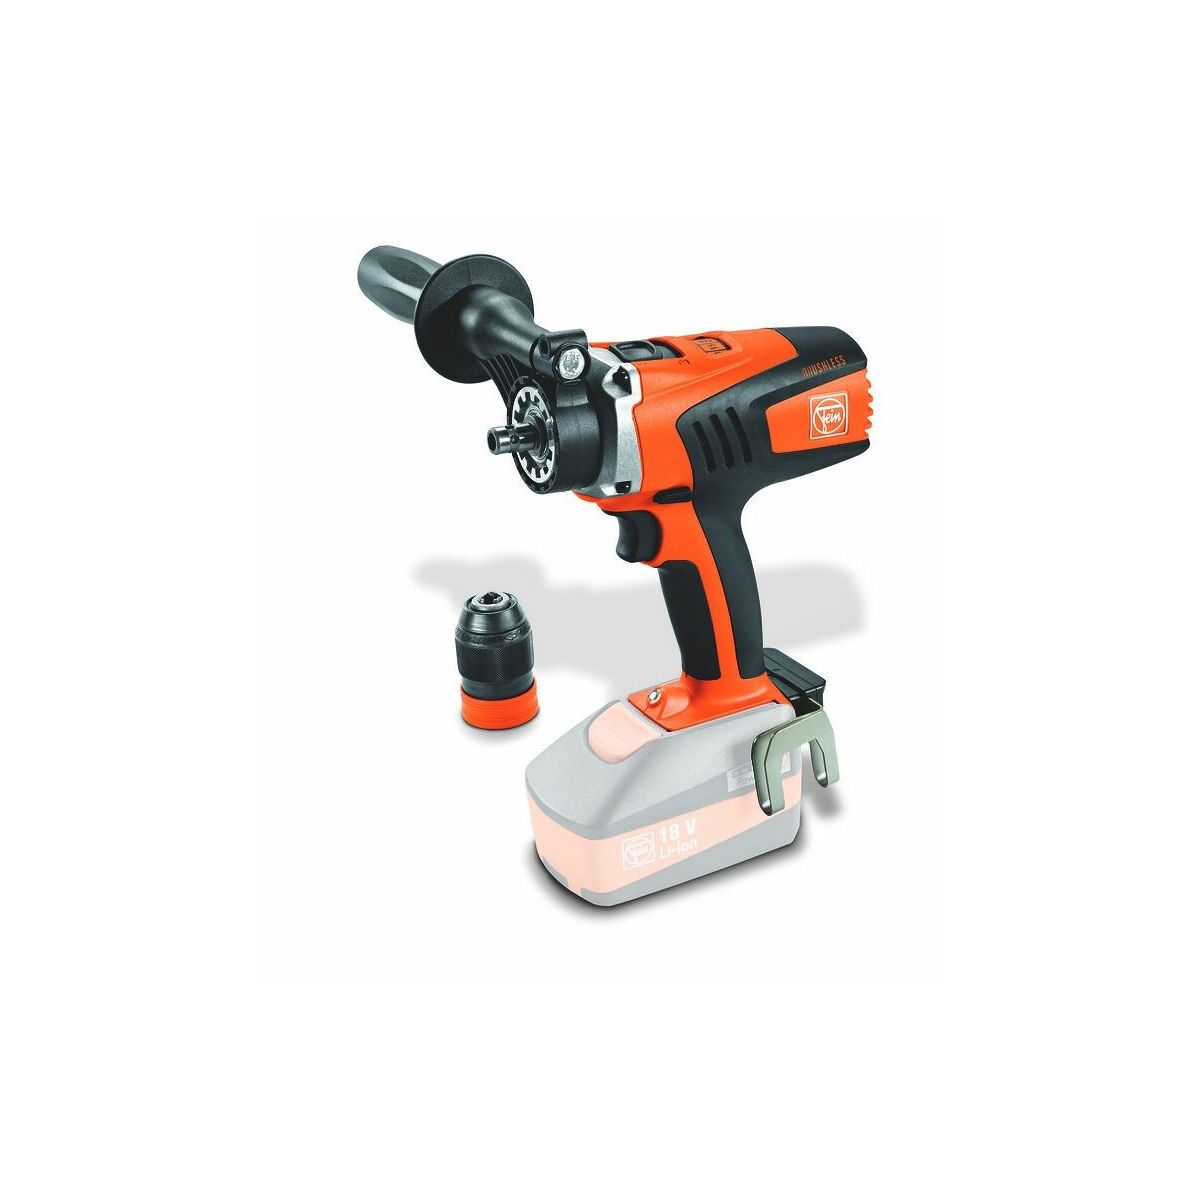 Cordless drill/driver without rechargeable battery and charger